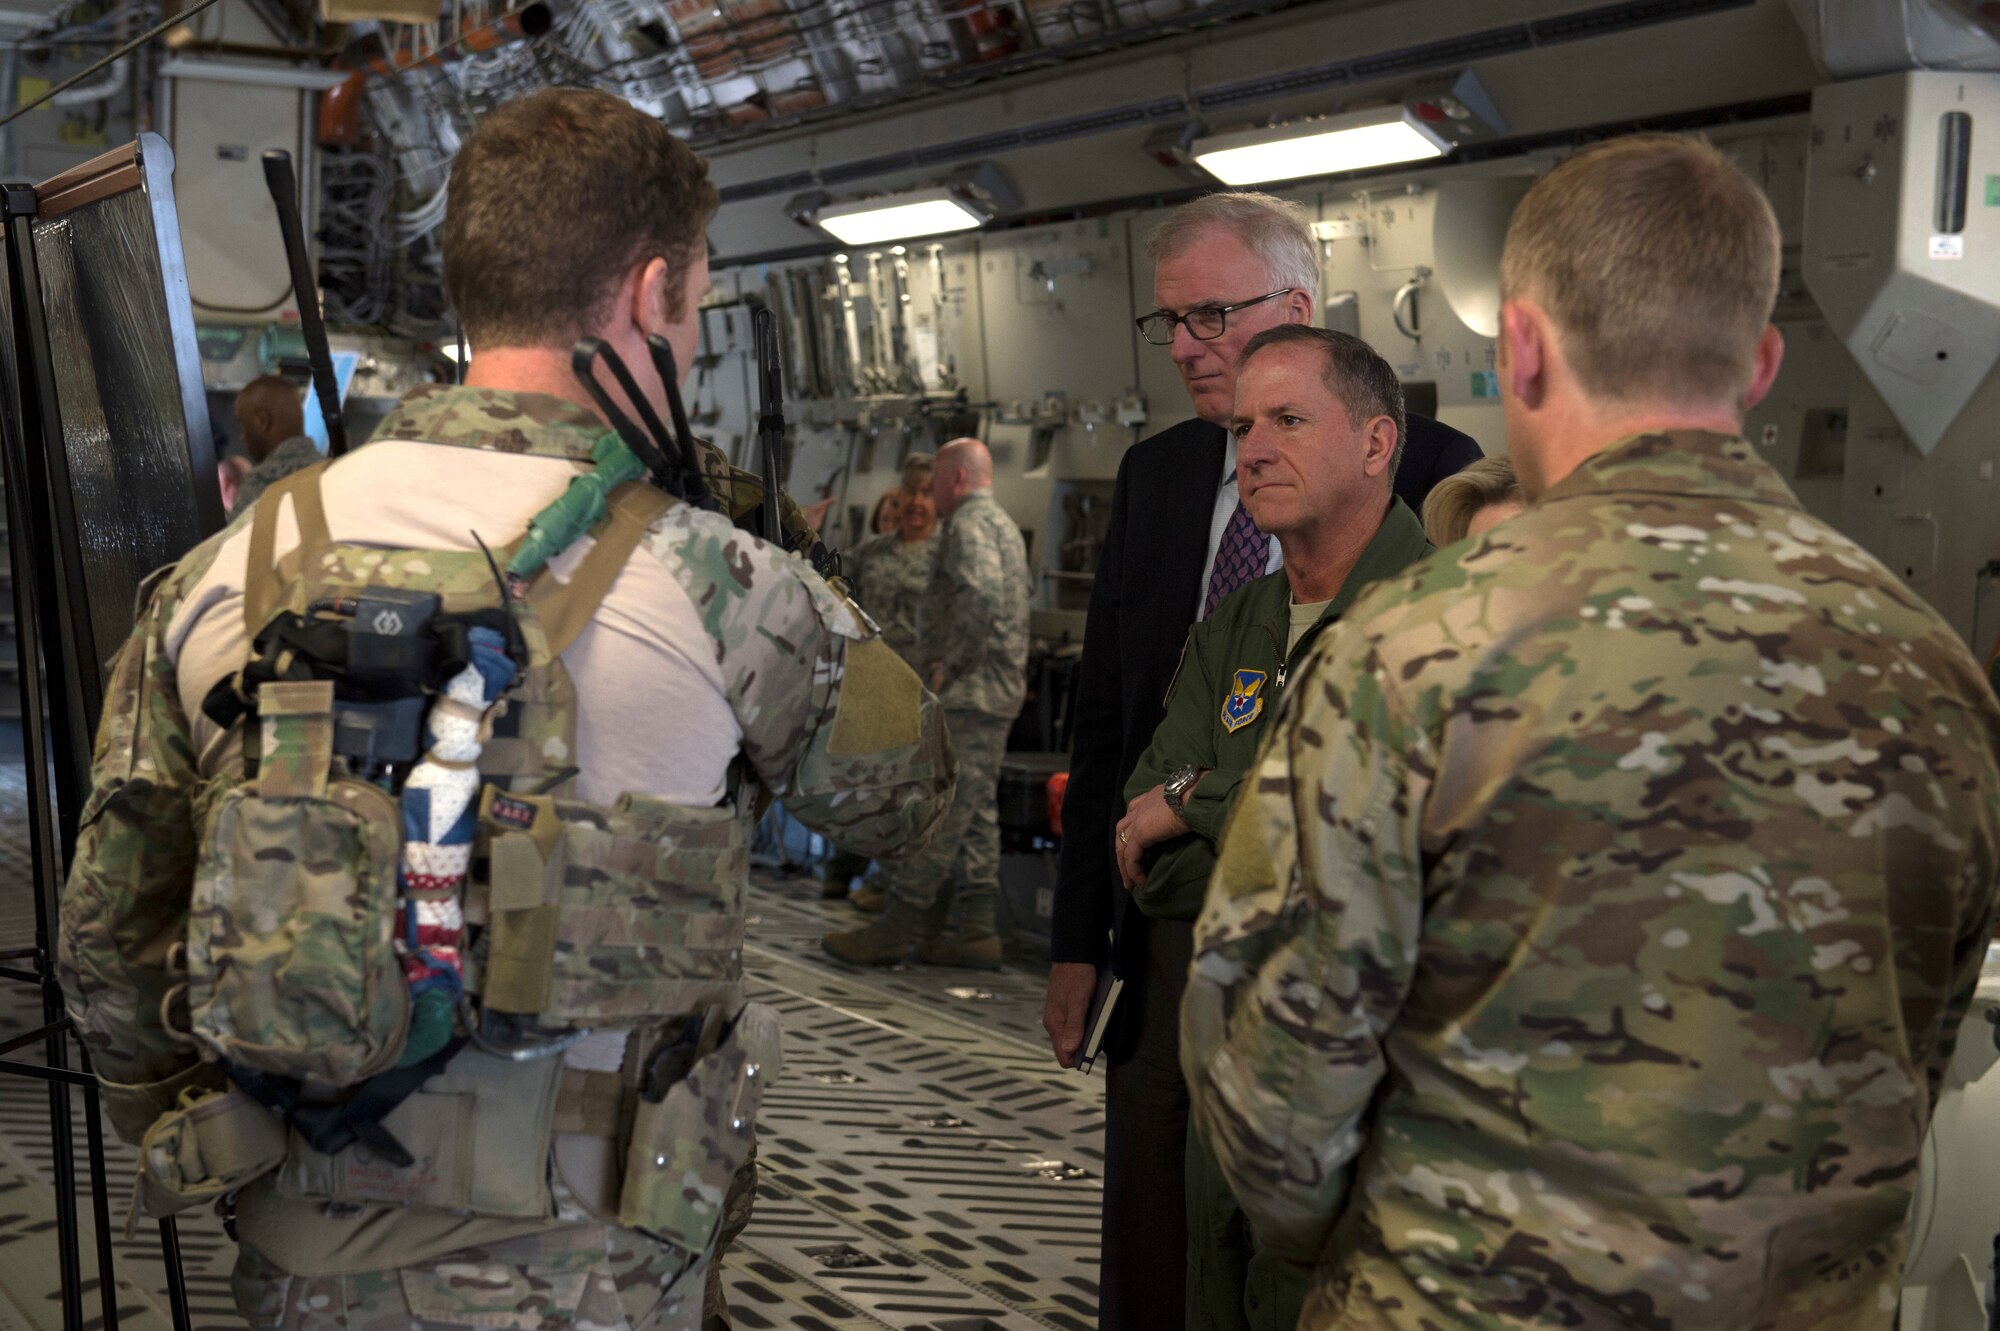 Gen David Goldfein, Chief of Staff of the Air Force, talks with members of the 22nd Special Tactics Squadron about the role they play in the Air Force mission, June 5, 2018, at Joint Base Lewis-McChord, Wash. The 22 STS Airmen use their unique skills to ensure ground and air superiority in any location they deploy. (U.S. Air Force photo by A1C Sara Hoerichs)